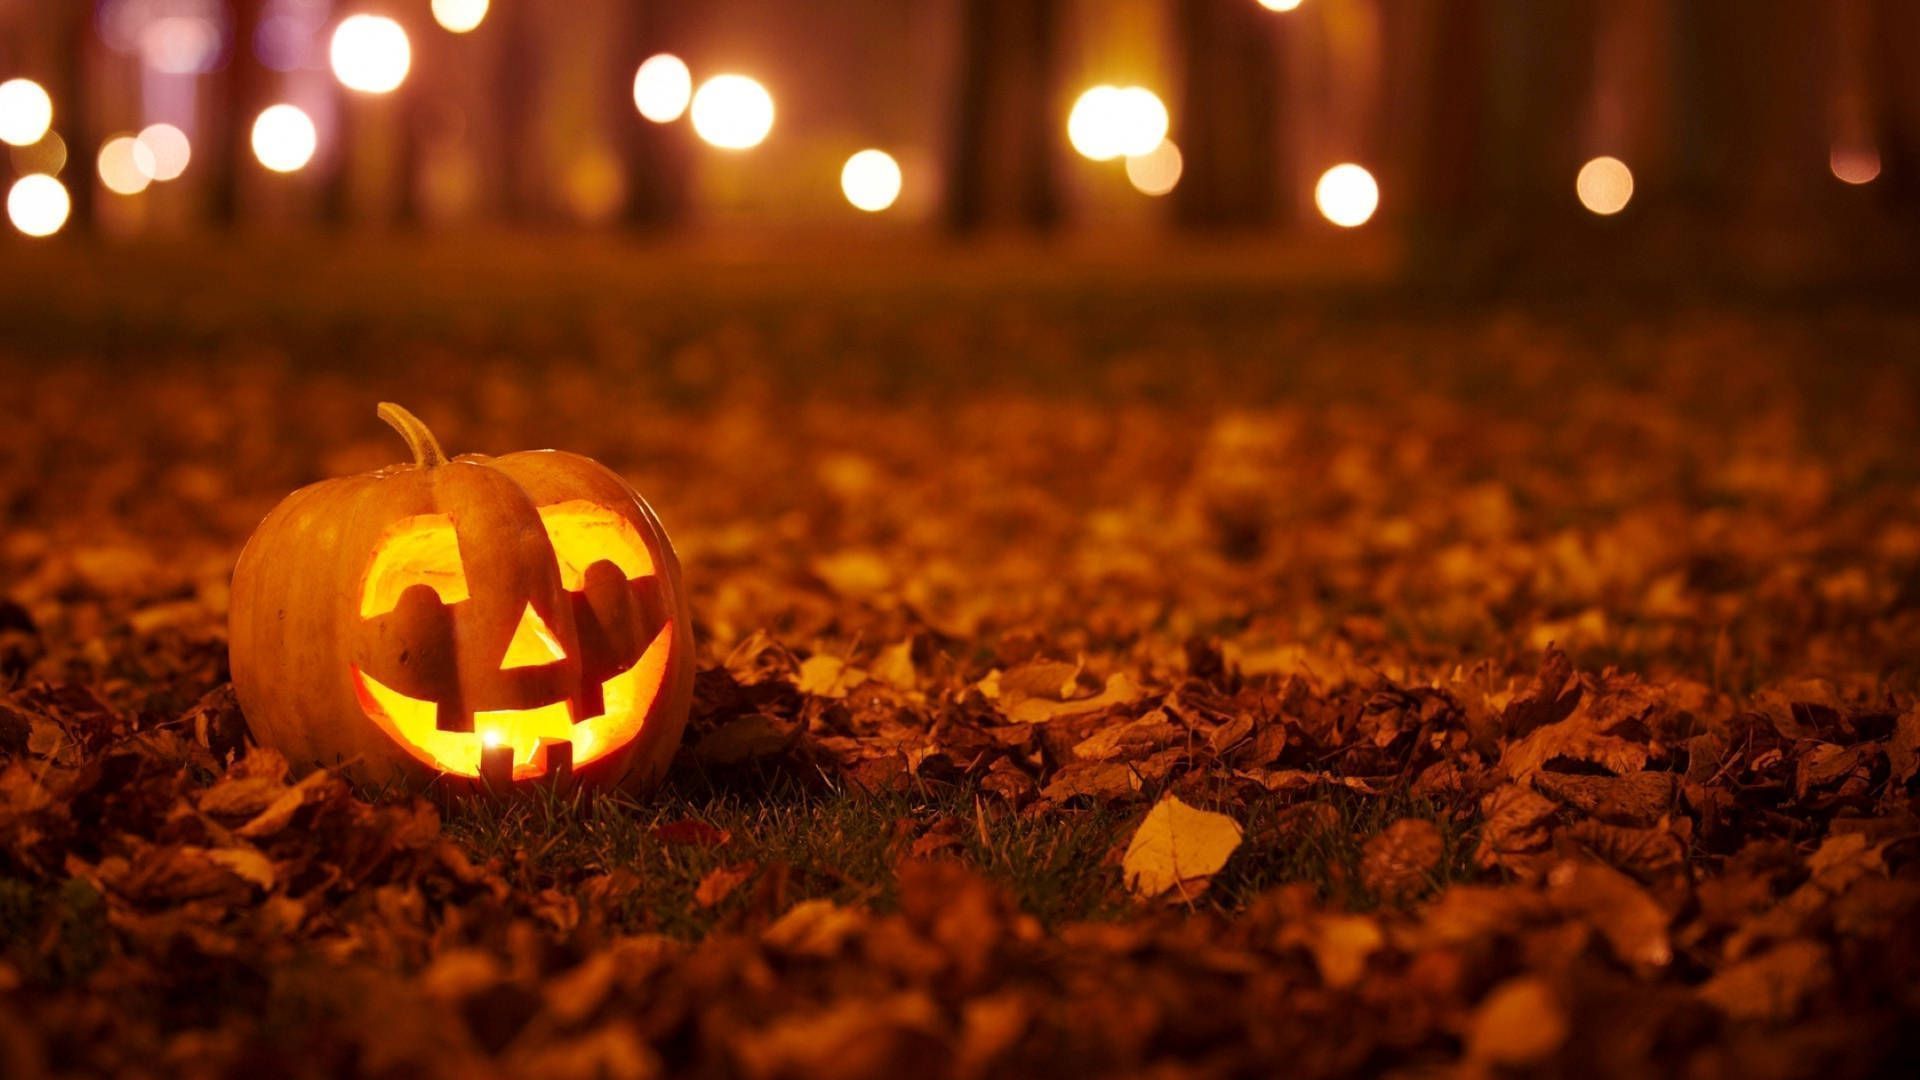 A carved pumpkin sits on a bed of leaves at night. - Halloween, Halloween desktop, cute Halloween